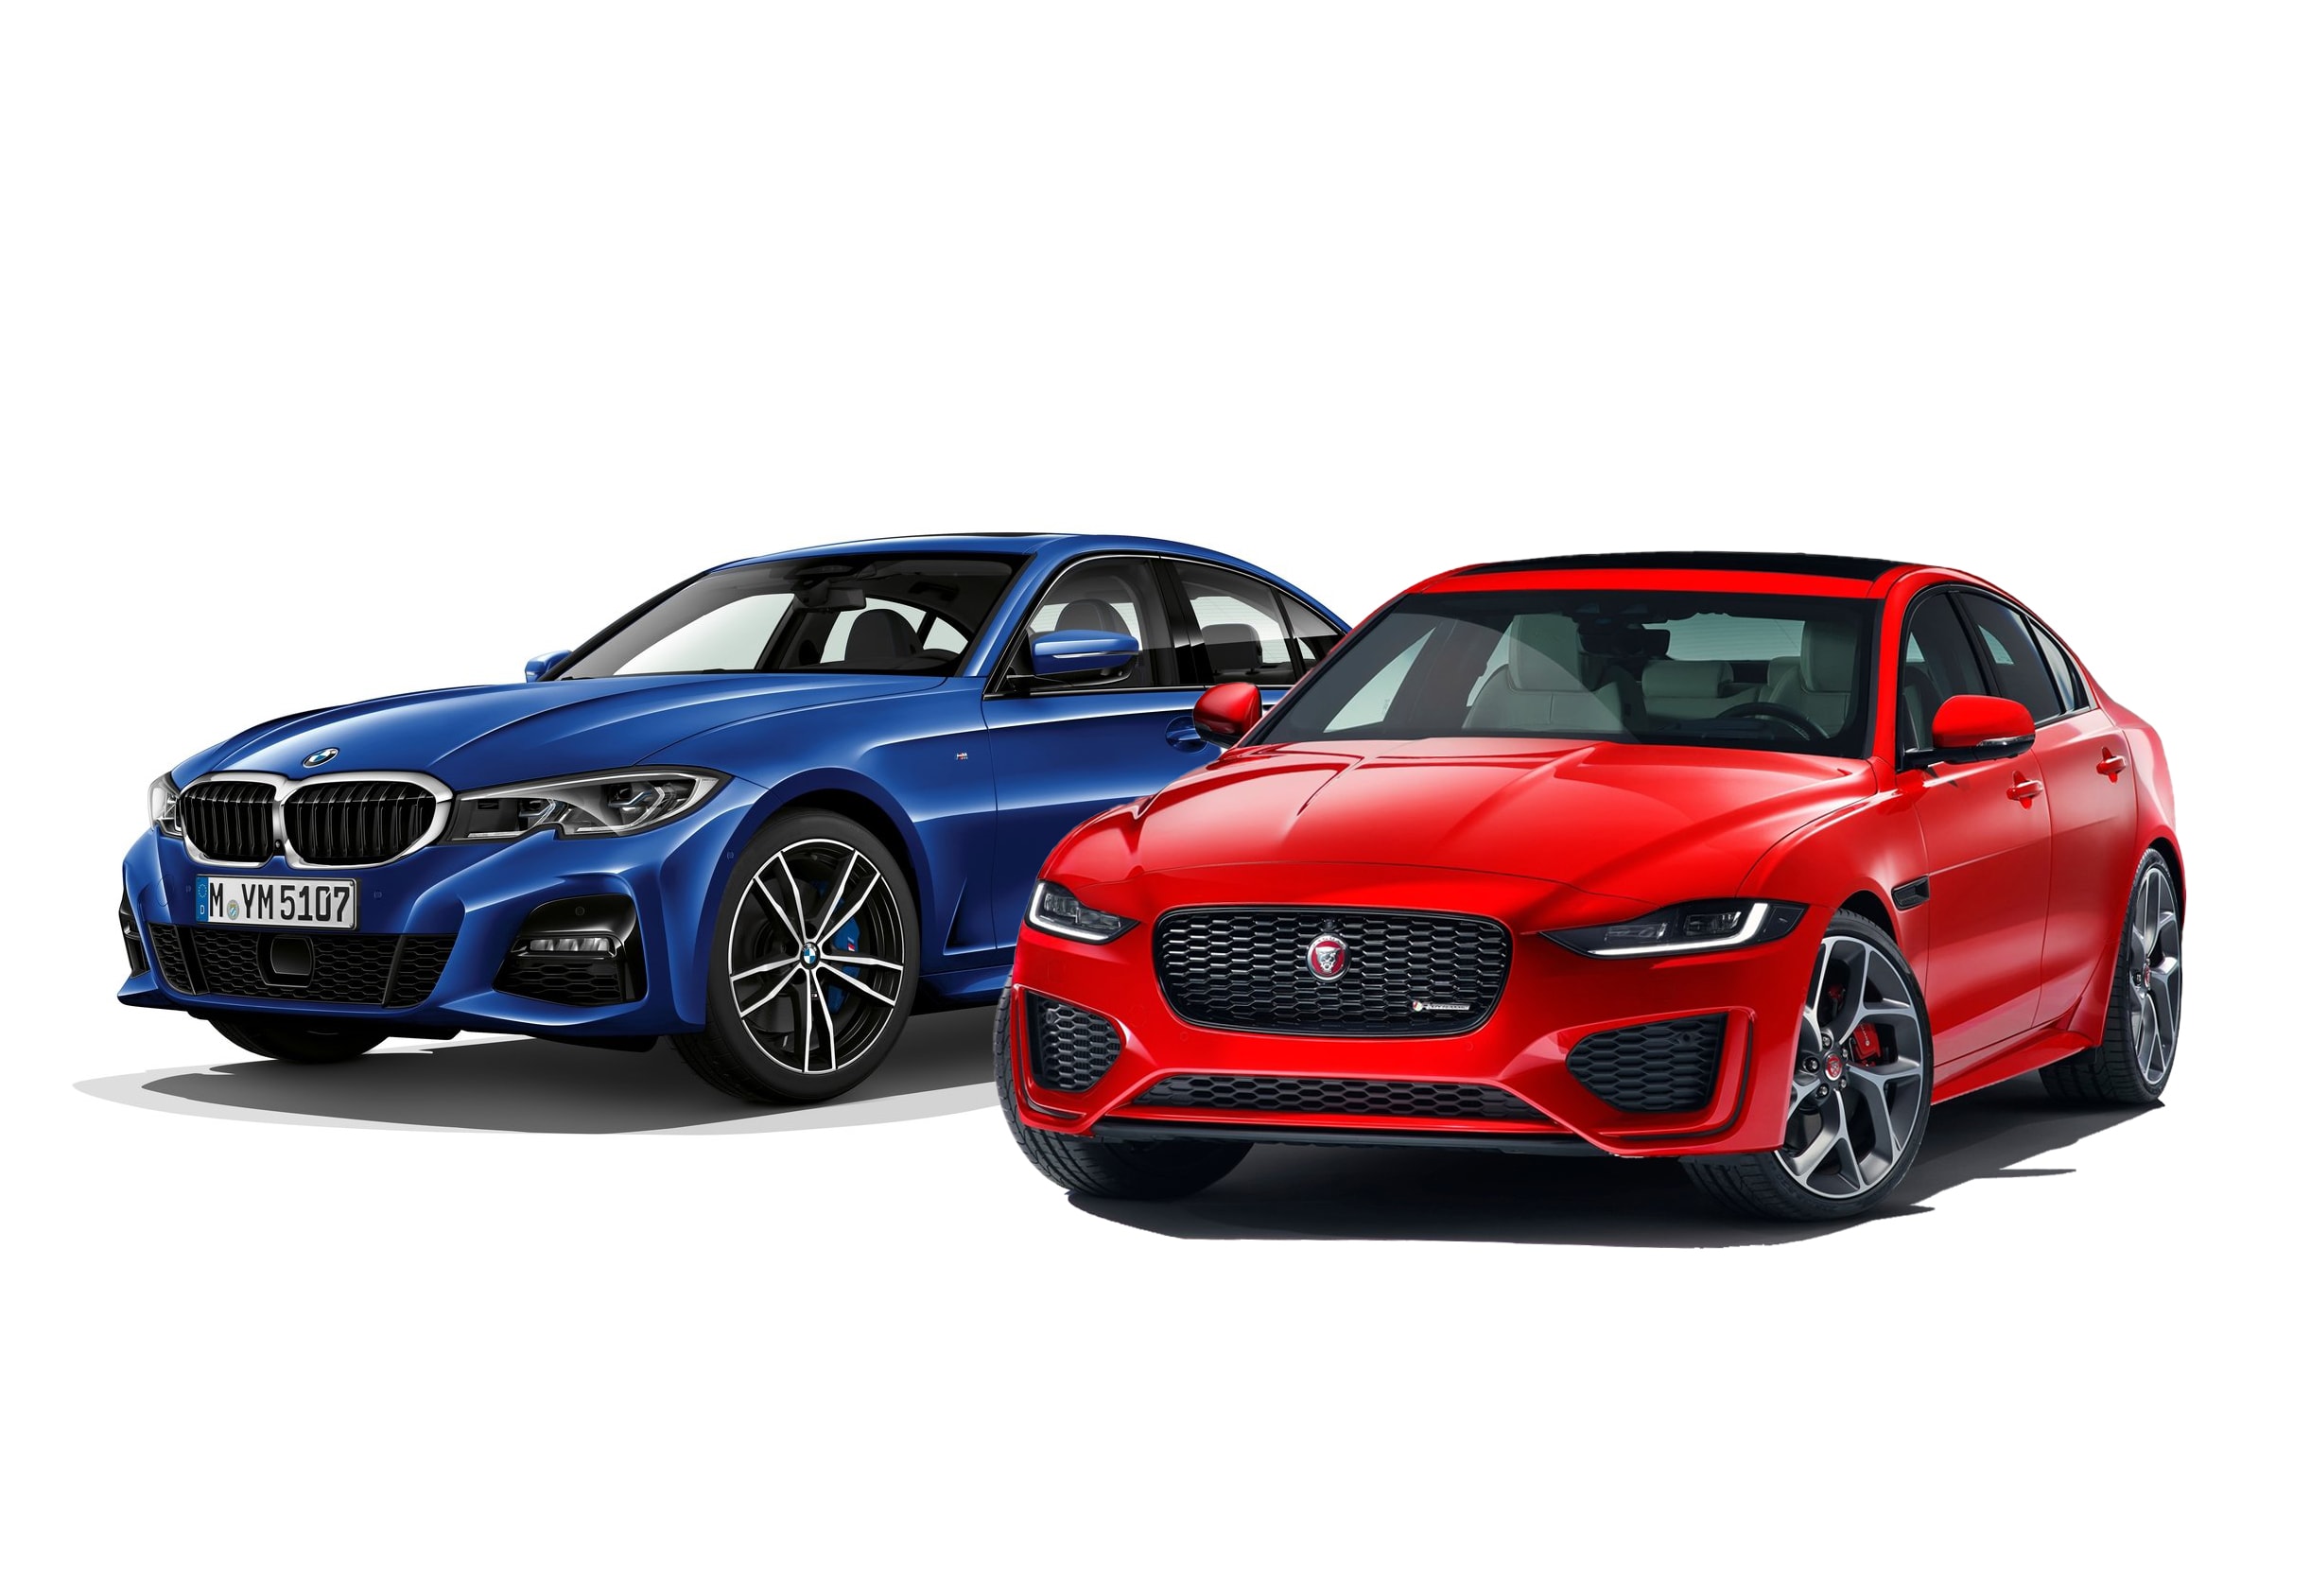 2017 Jaguar XE vs 2017 BMW 3 Series Which Is Better  Autotrader